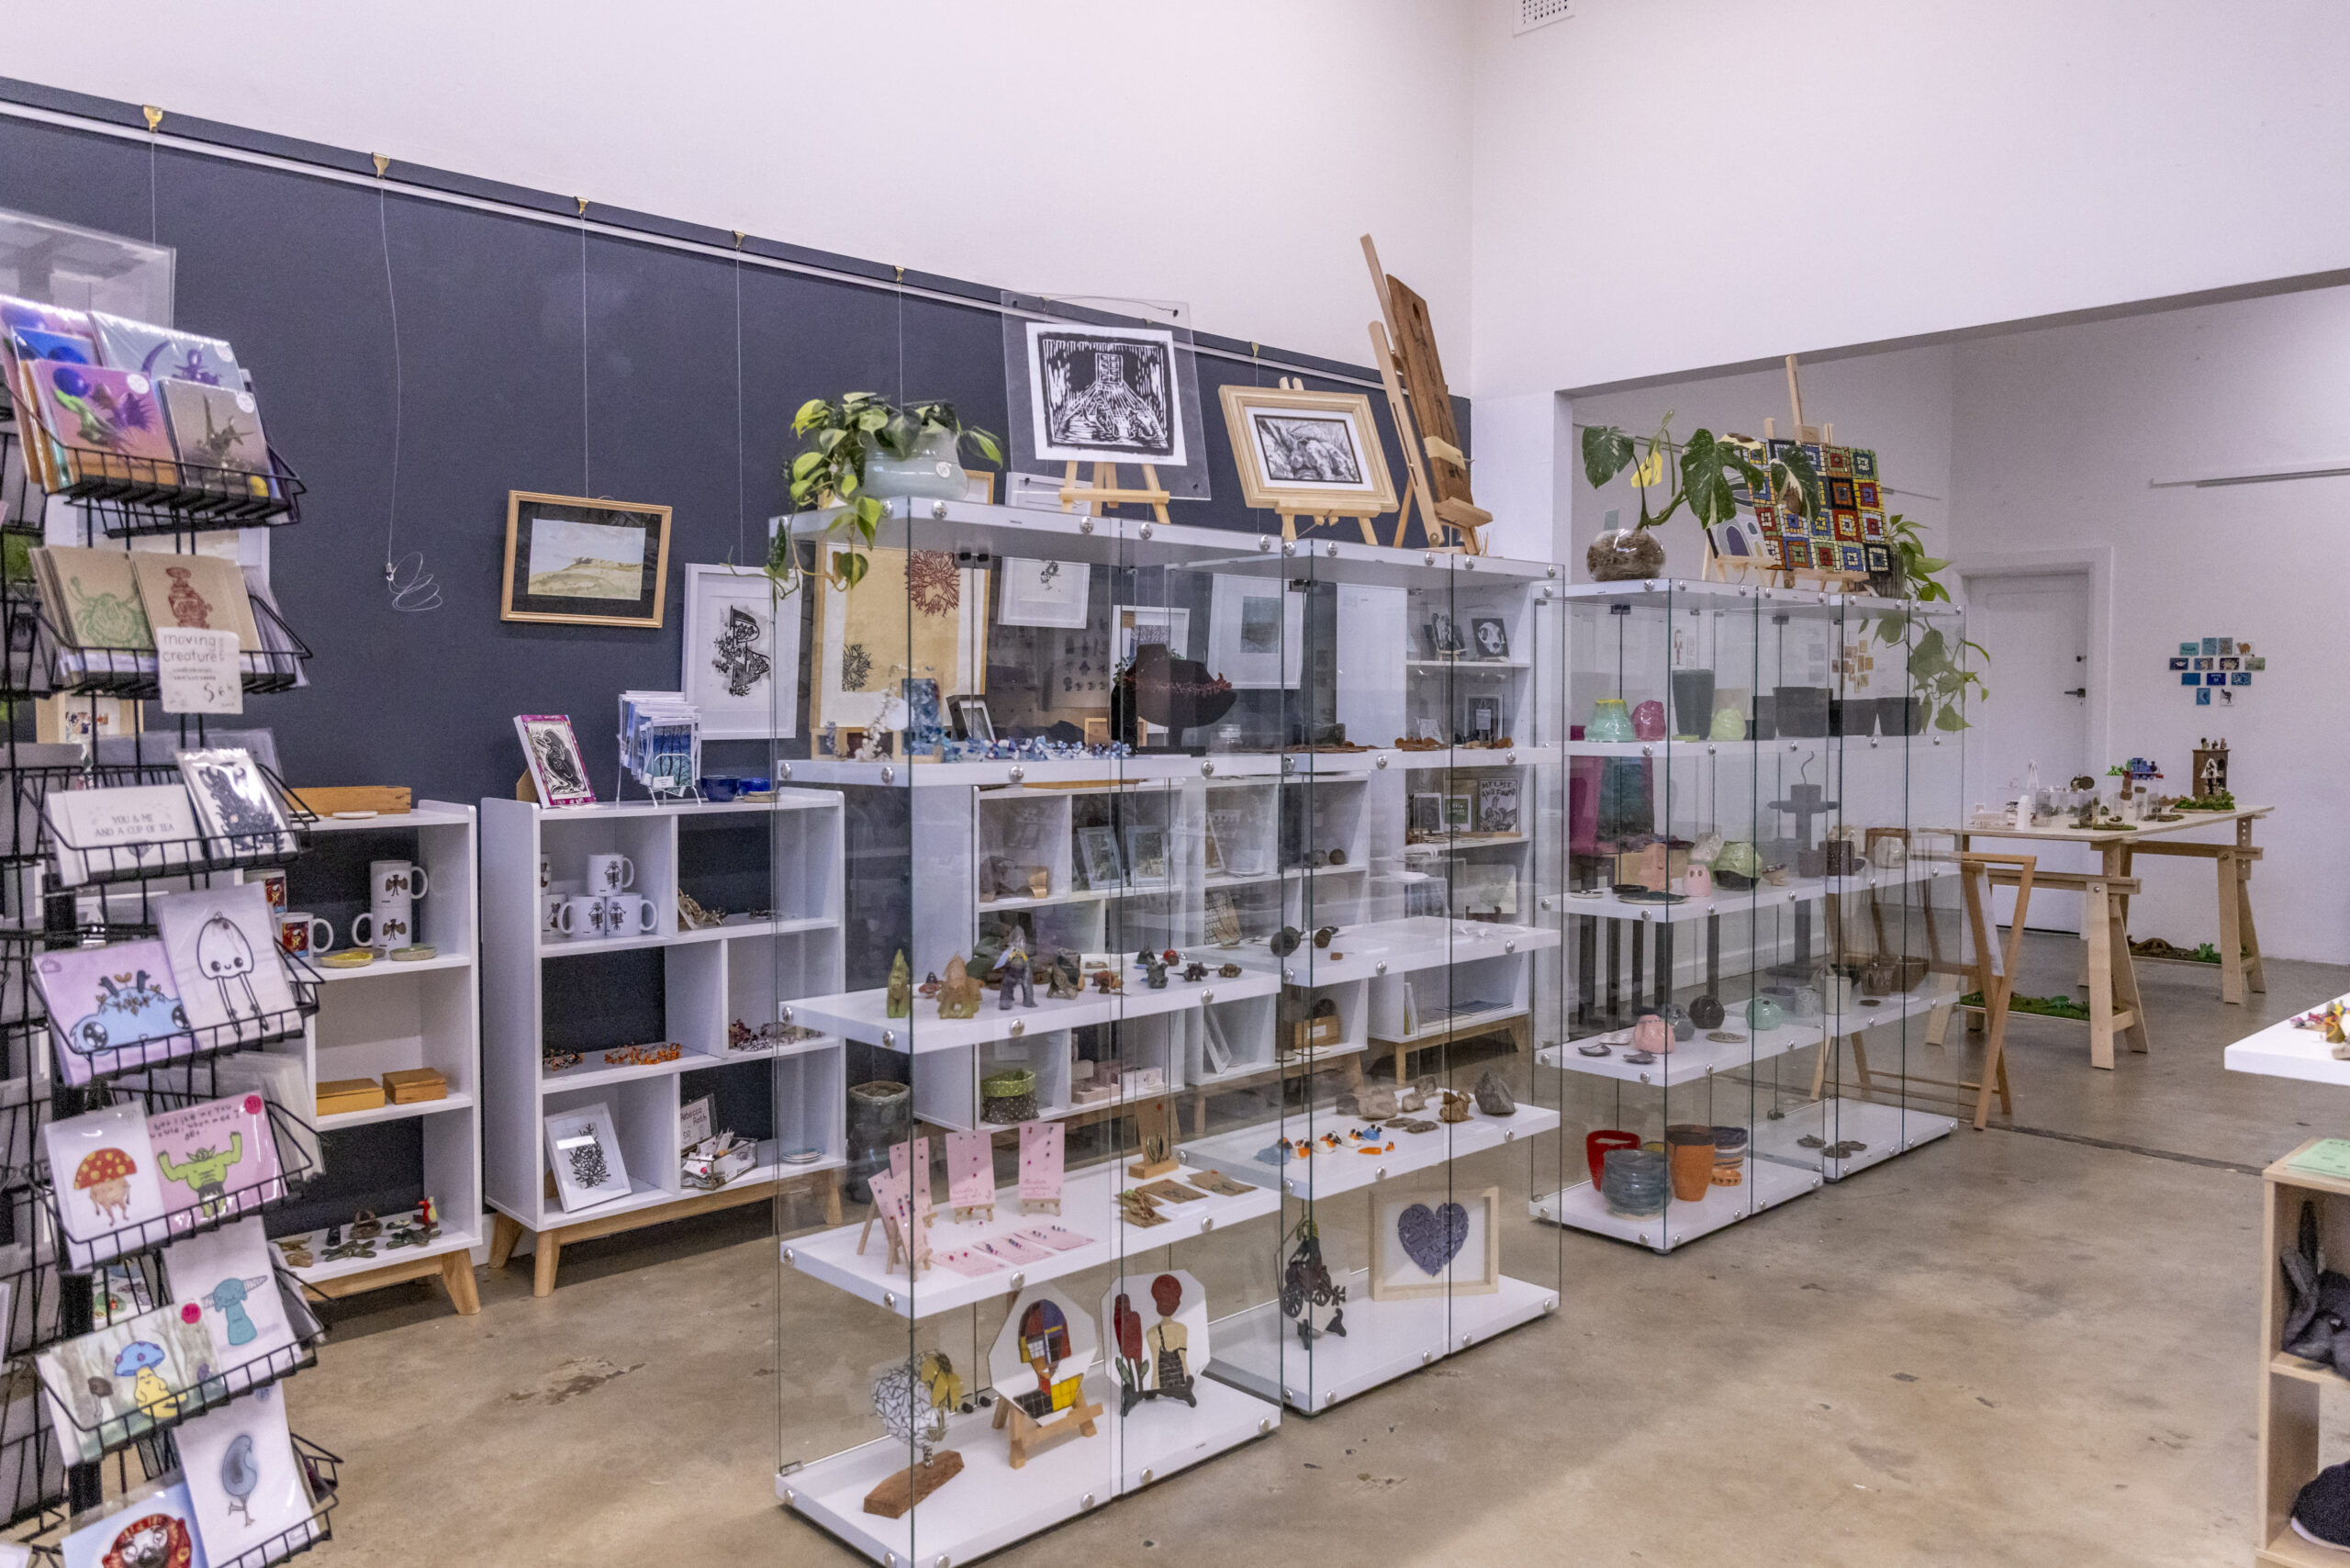 Image of the wonderful Artosaurus gallery shop space as part of their Artist Profile with Art Trails Tasmania